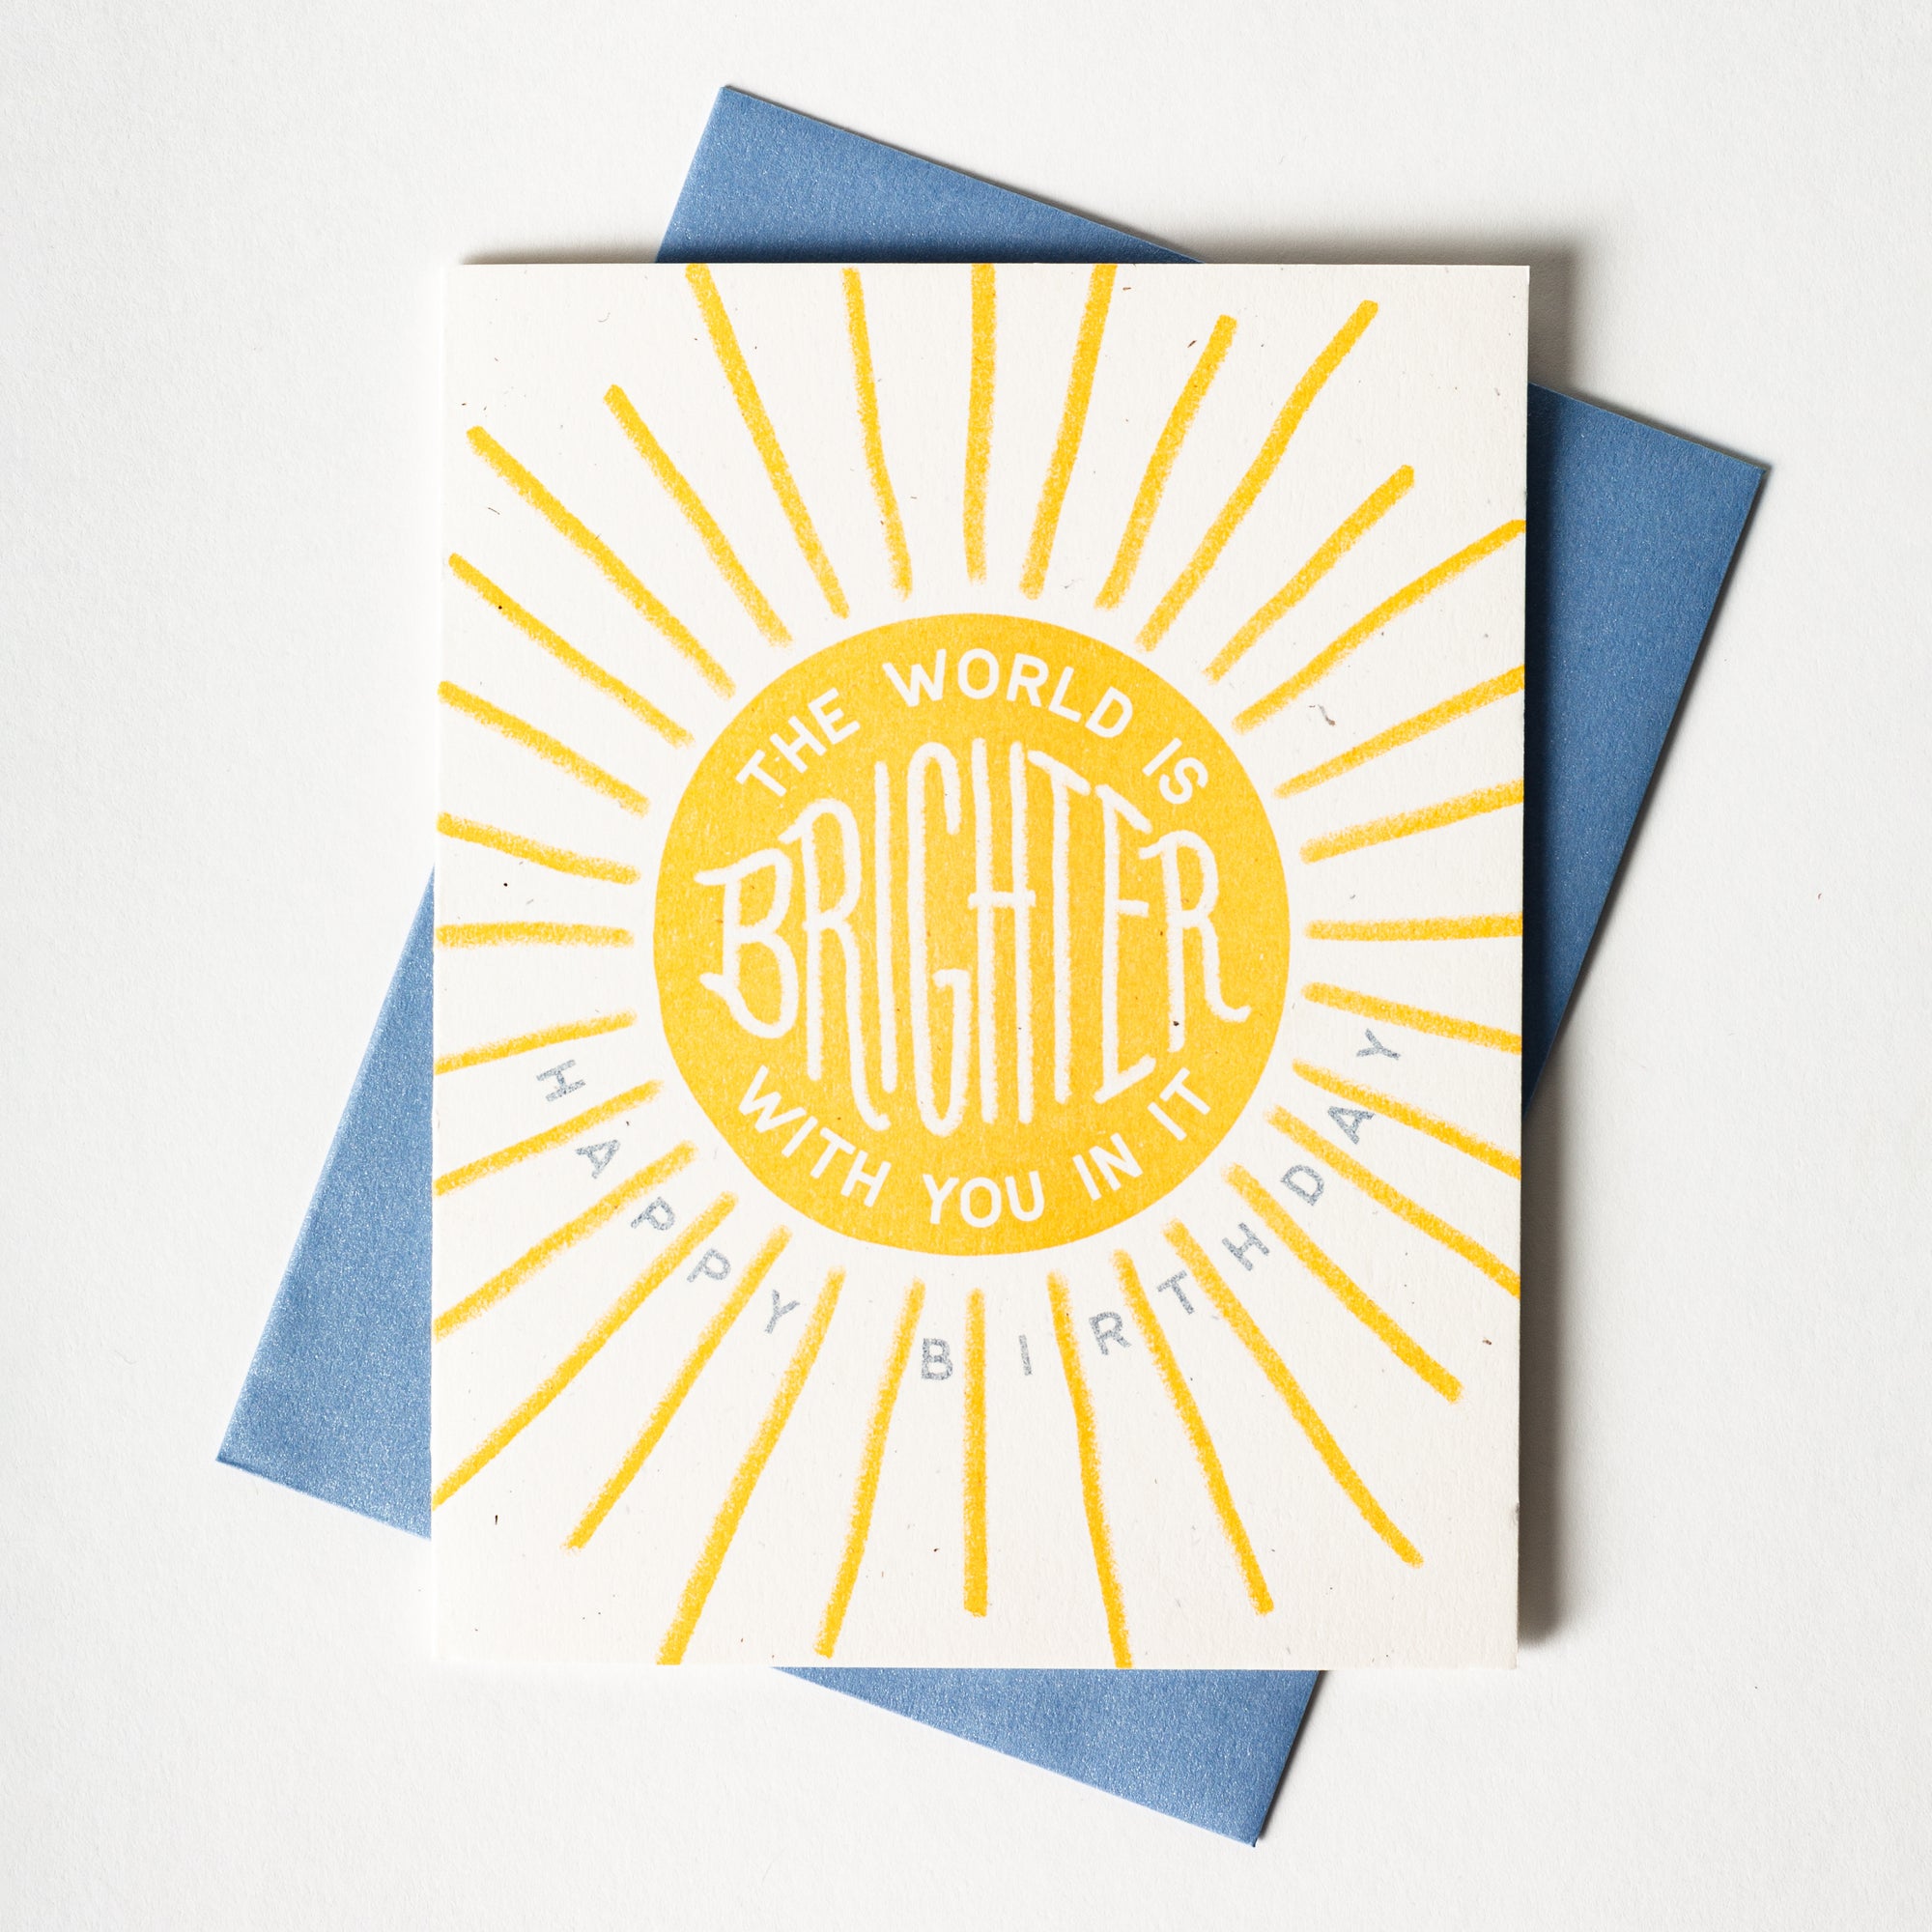 The World Is Brighter With You In It - Risograph Birthday Card